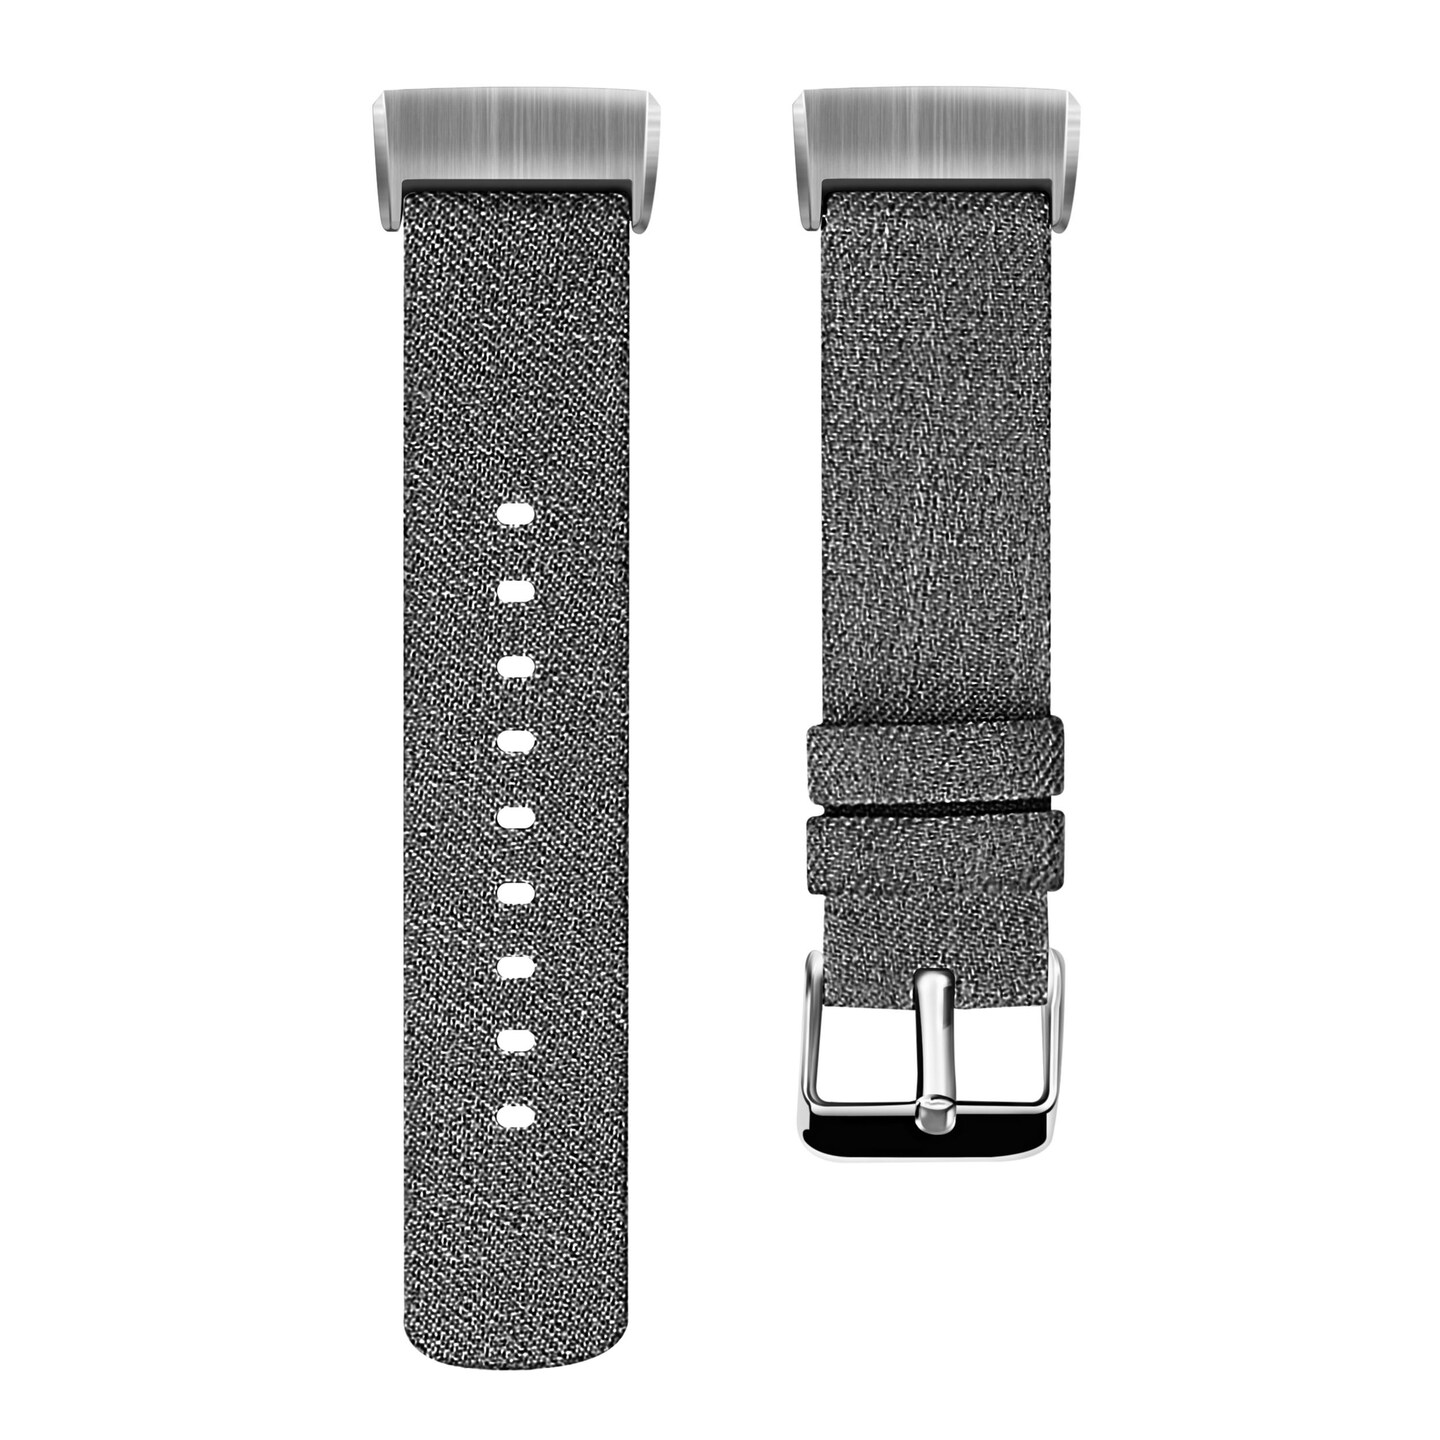 Insten Fabric Watch Band Compatible with Fitbit Charge 3, Charge 3 SE, Charge 4, and Charge 4 SE, Fitness Tracker Replacement Bands for Men and Women, Dark Gray